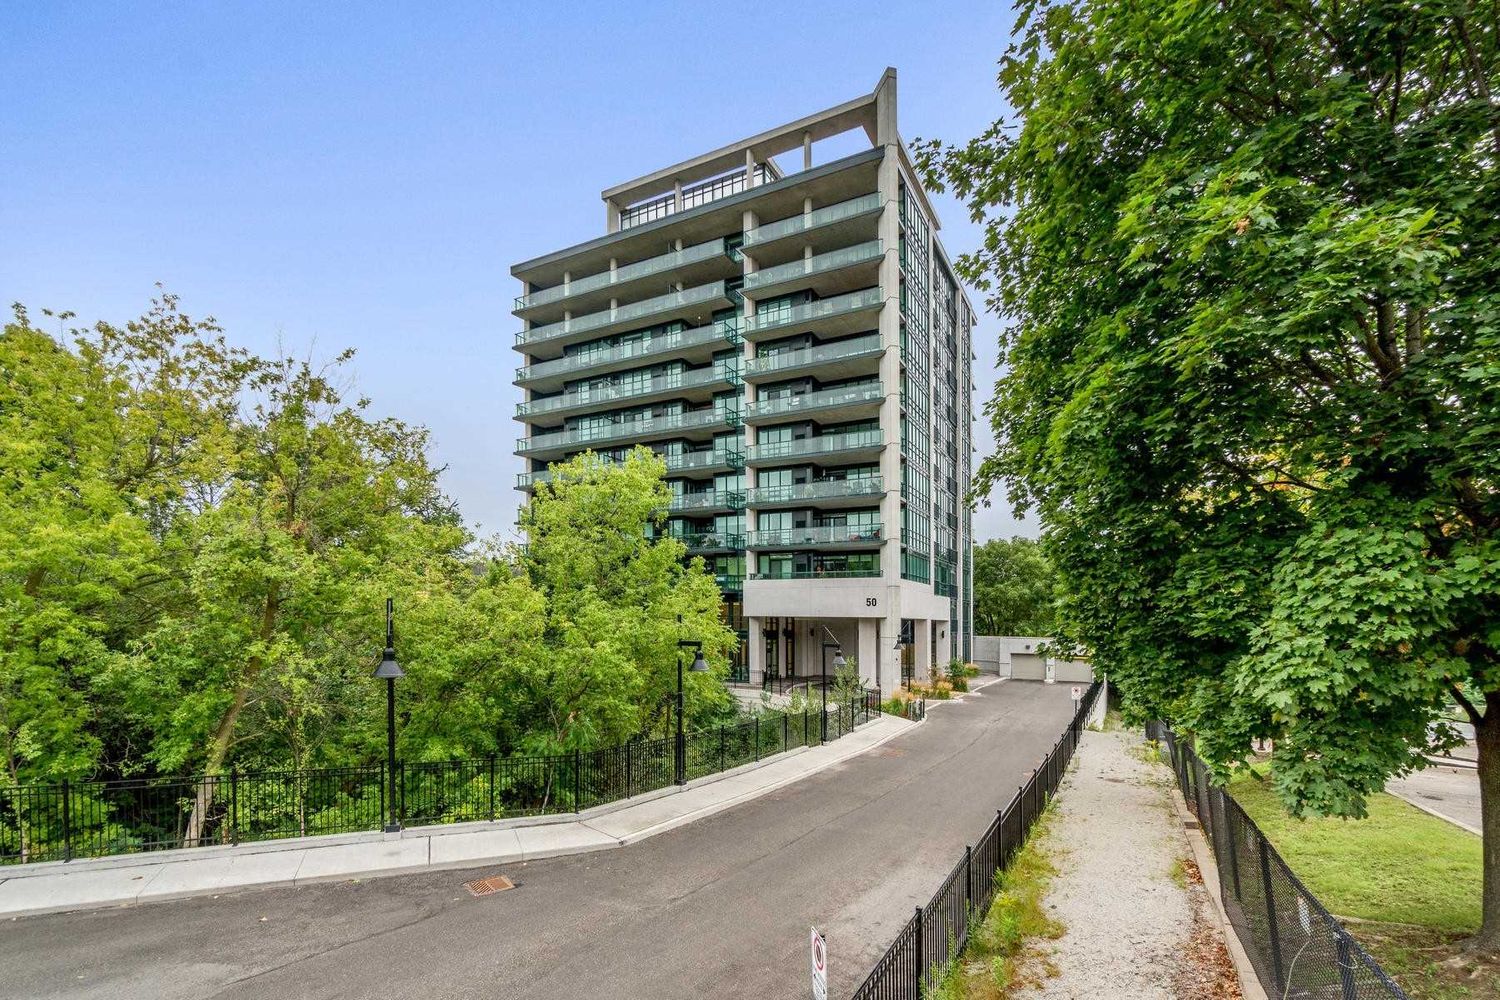 50 Hall Rd. This condo at Georgetown Terraces Condos is located in  Halton Hills, Toronto - image #1 of 2 by Strata.ca